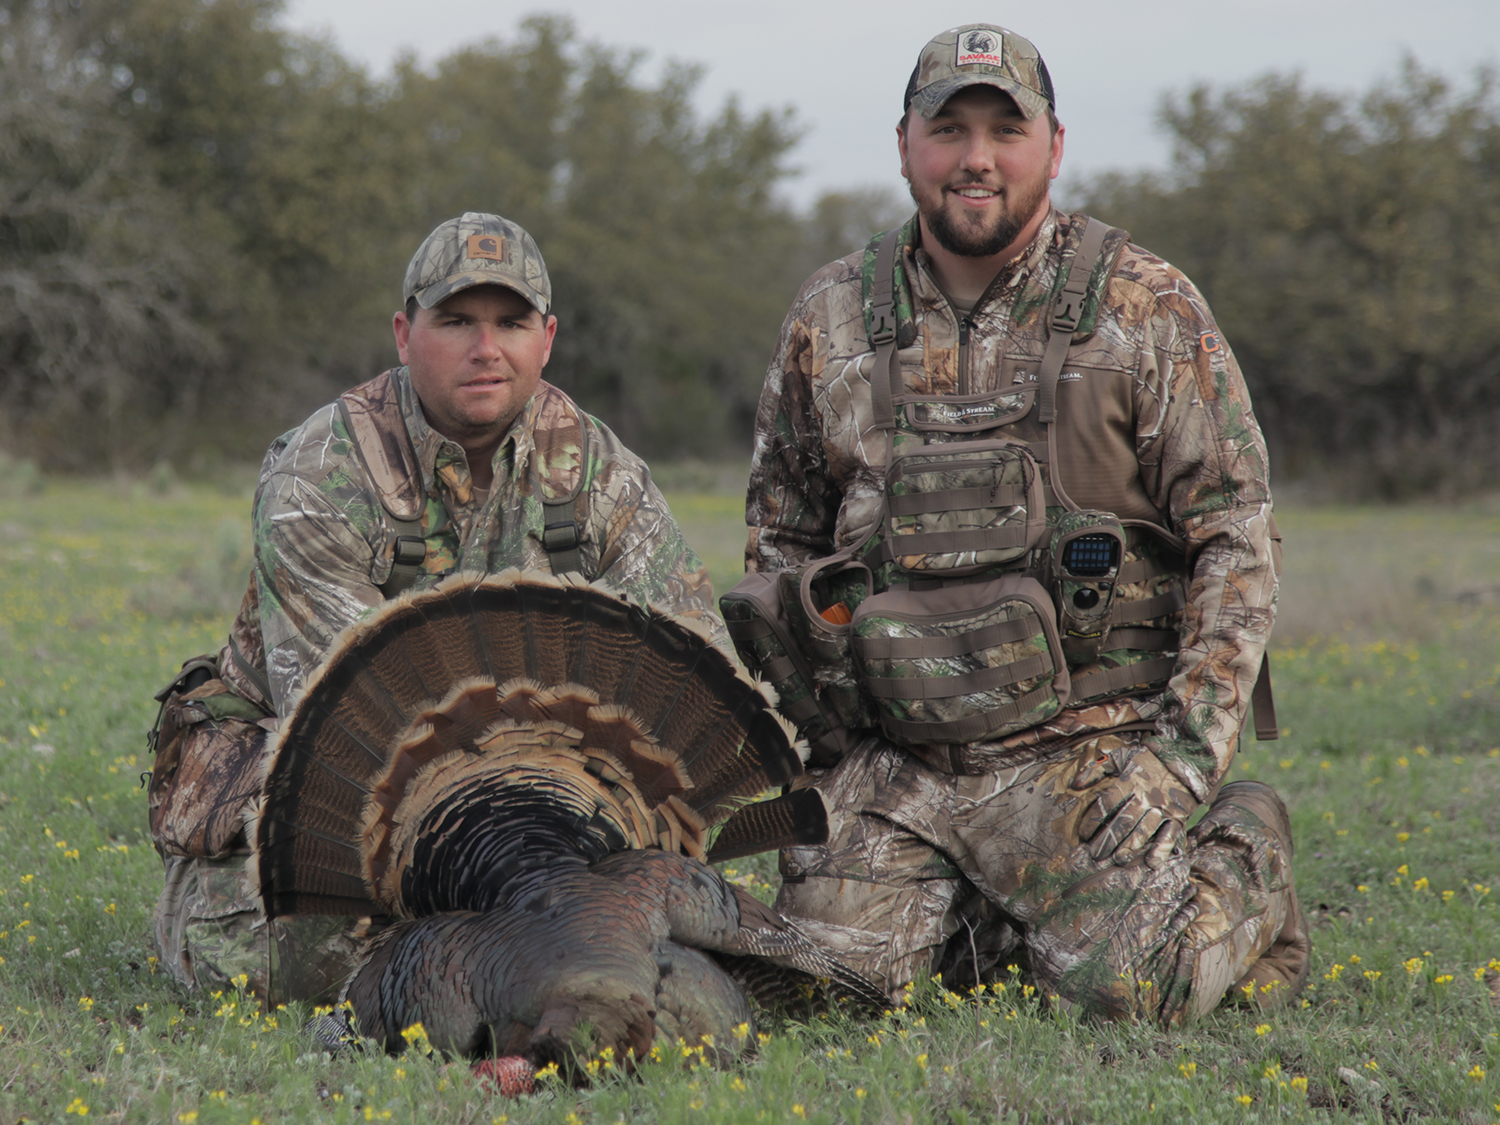 Mike Stroff with a large Rio Grande turkey.